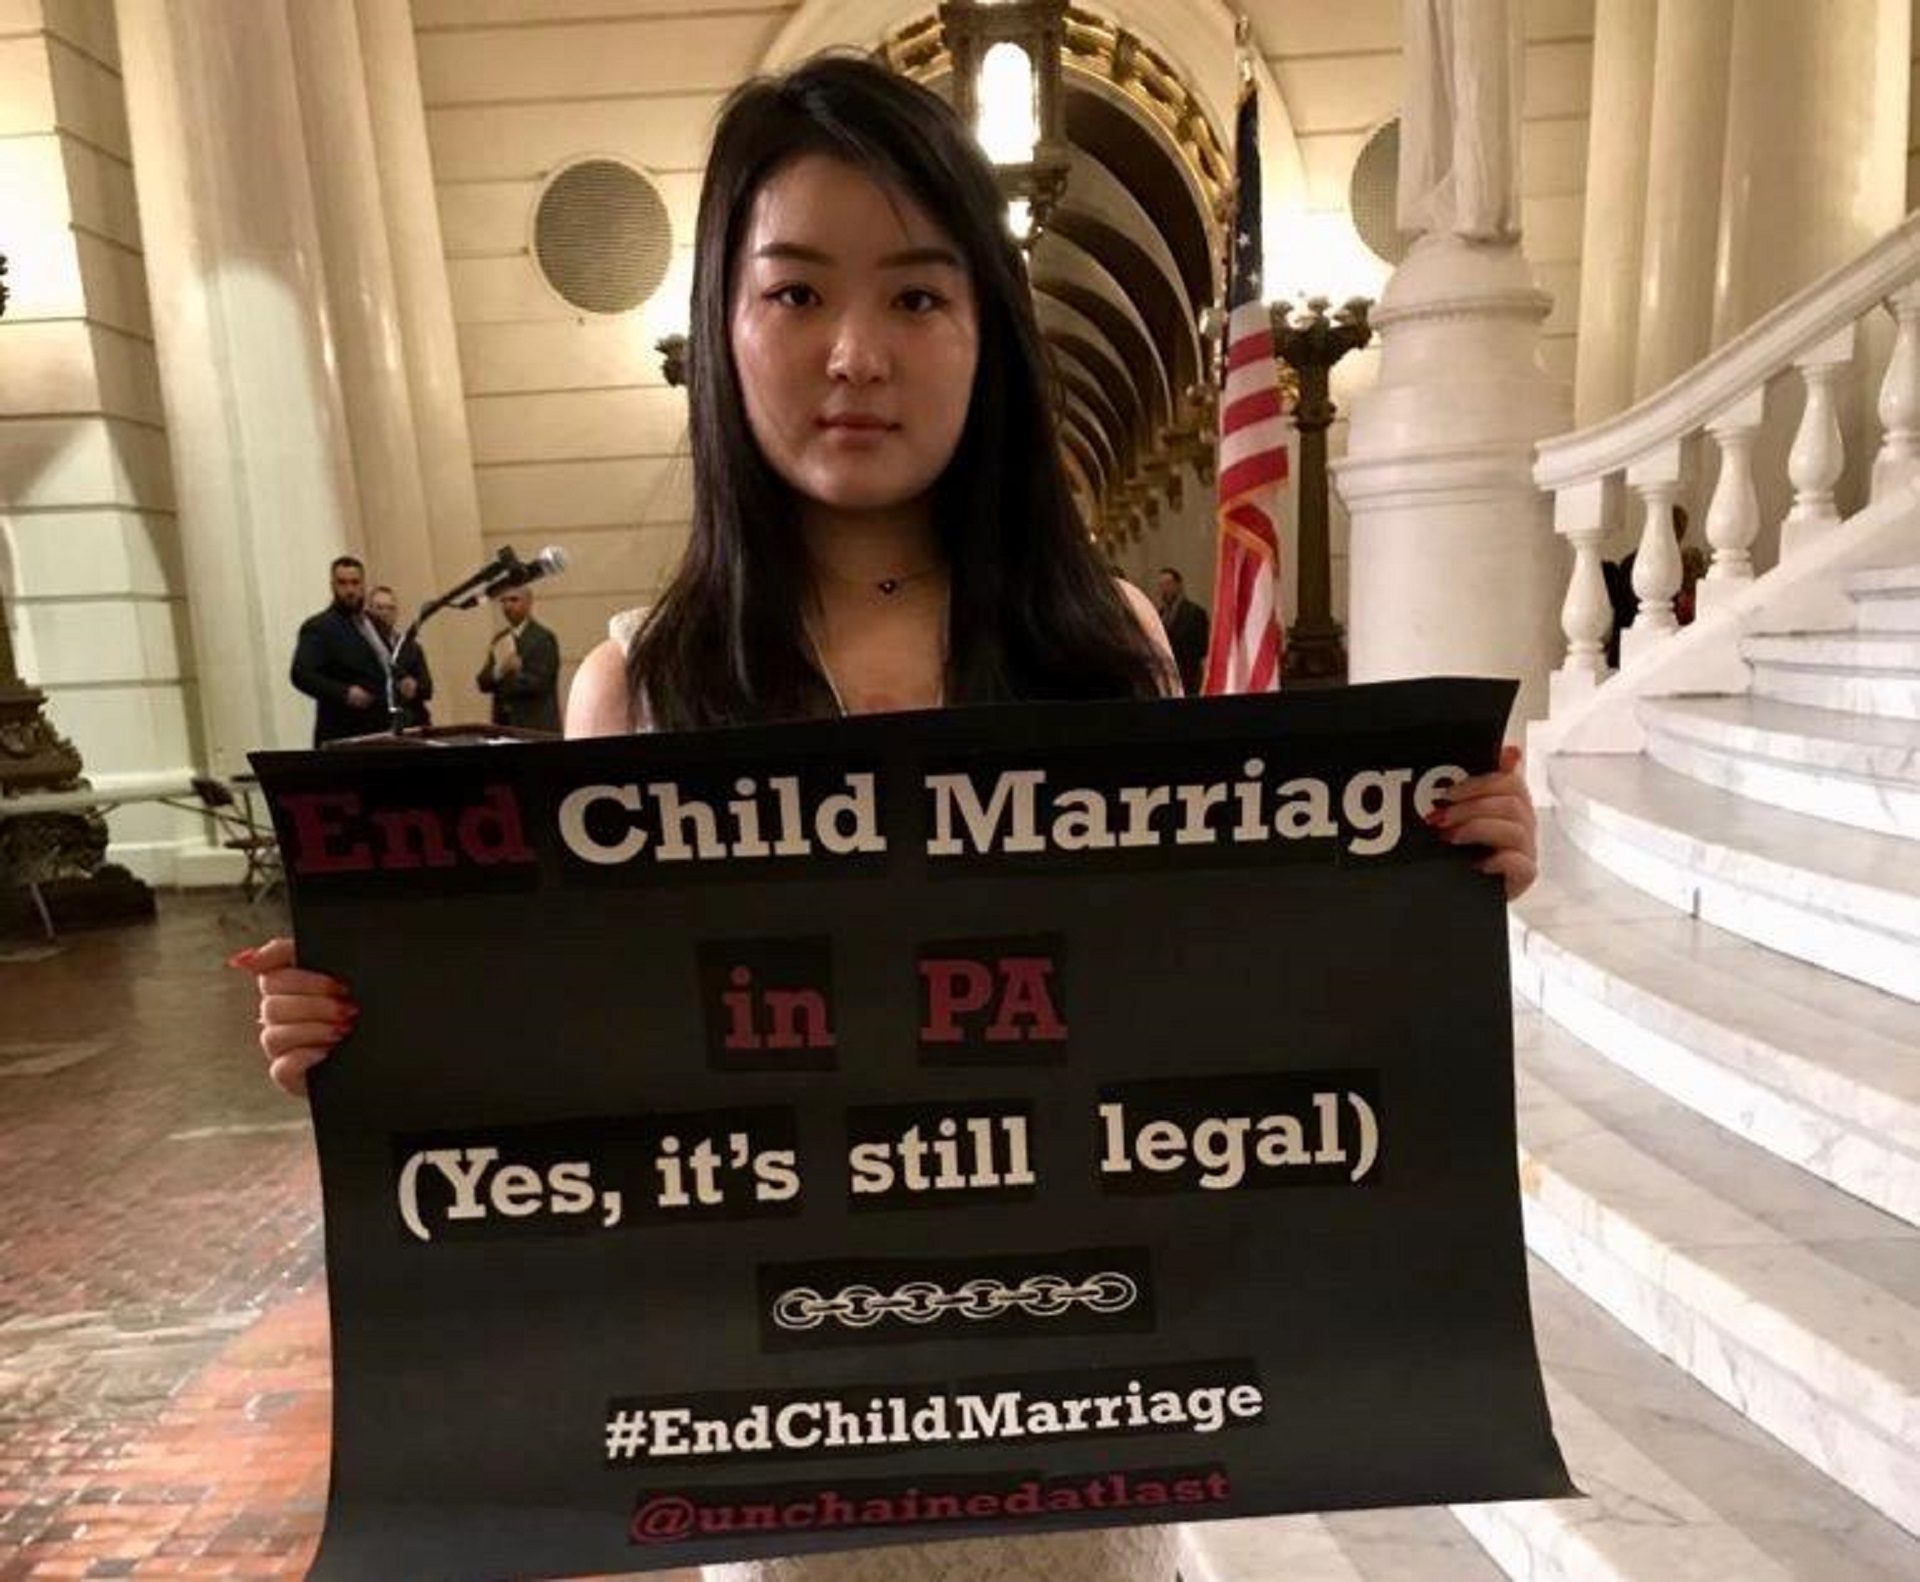 PA Governor signs bill into law banning child marriage